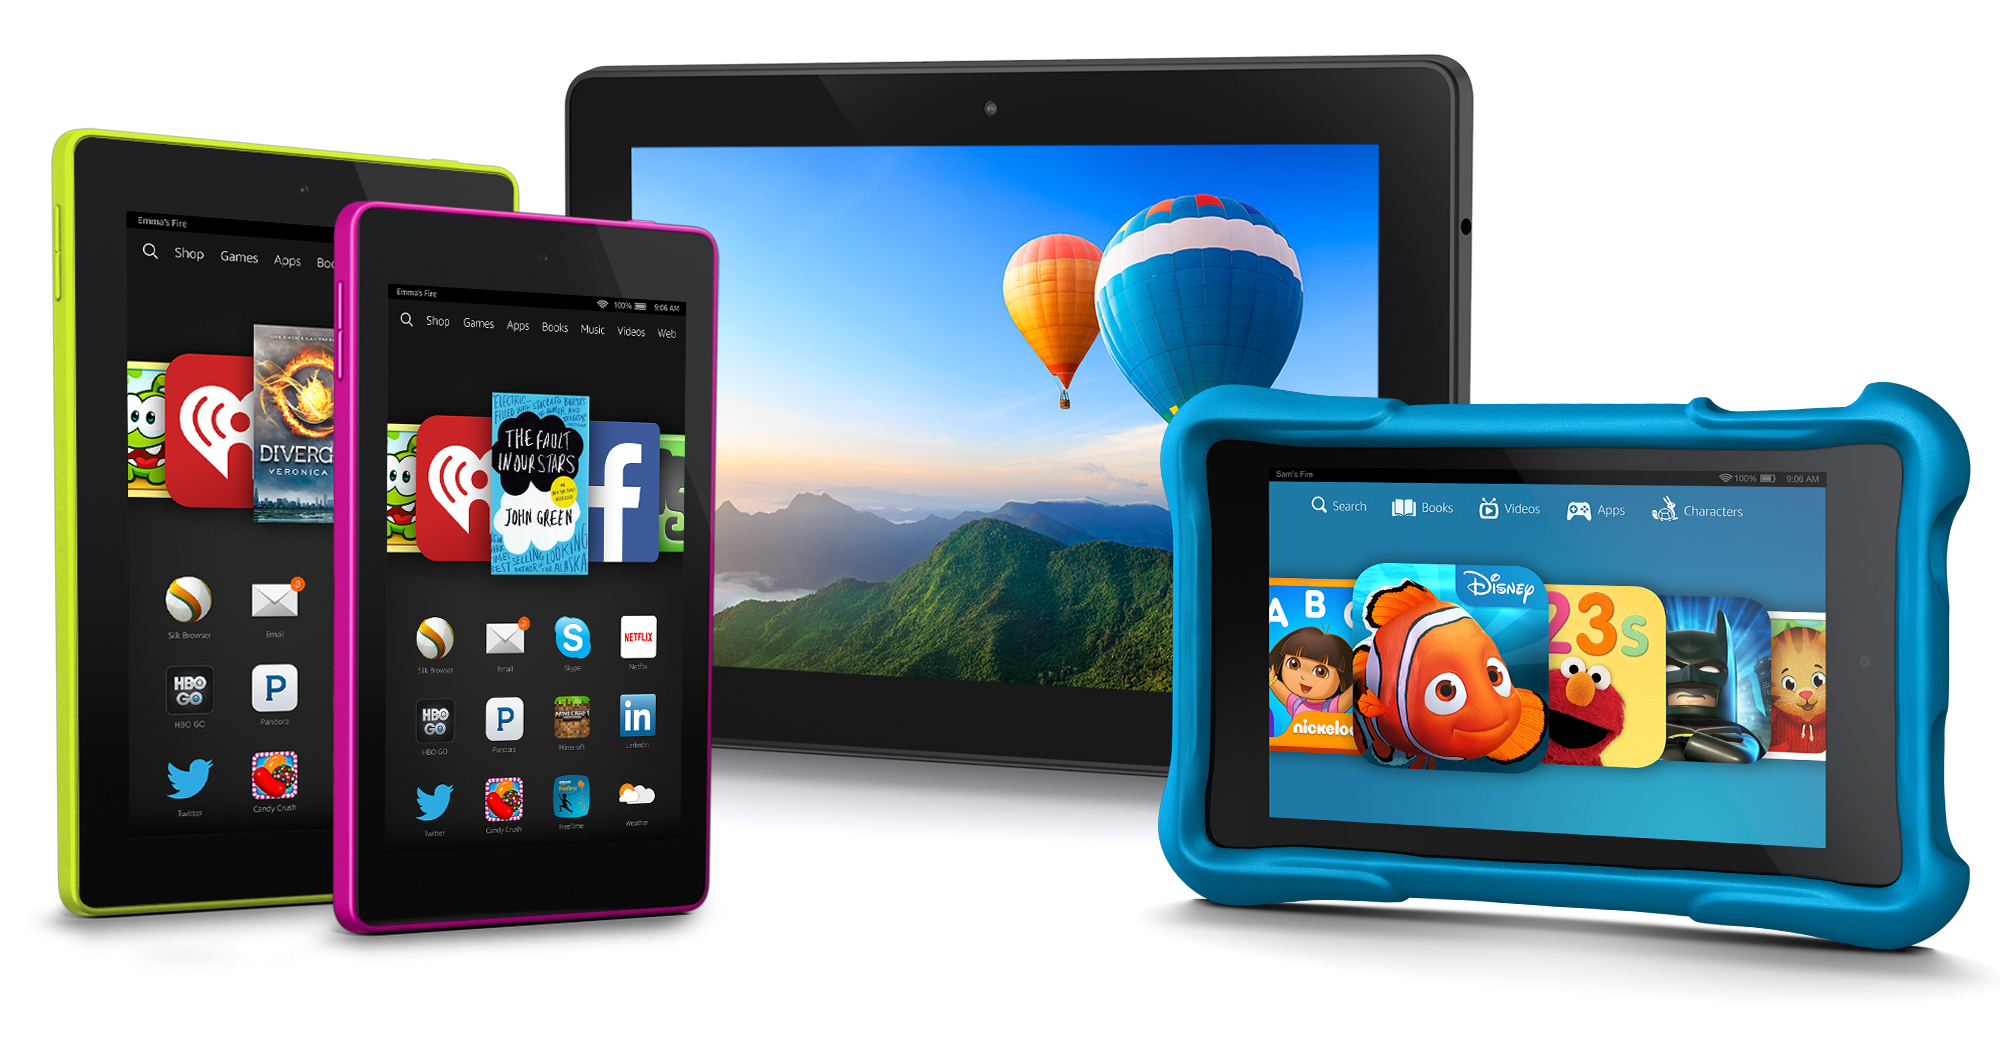 Amazons 4th generation of tablets announced, new Kindle Fire HDX